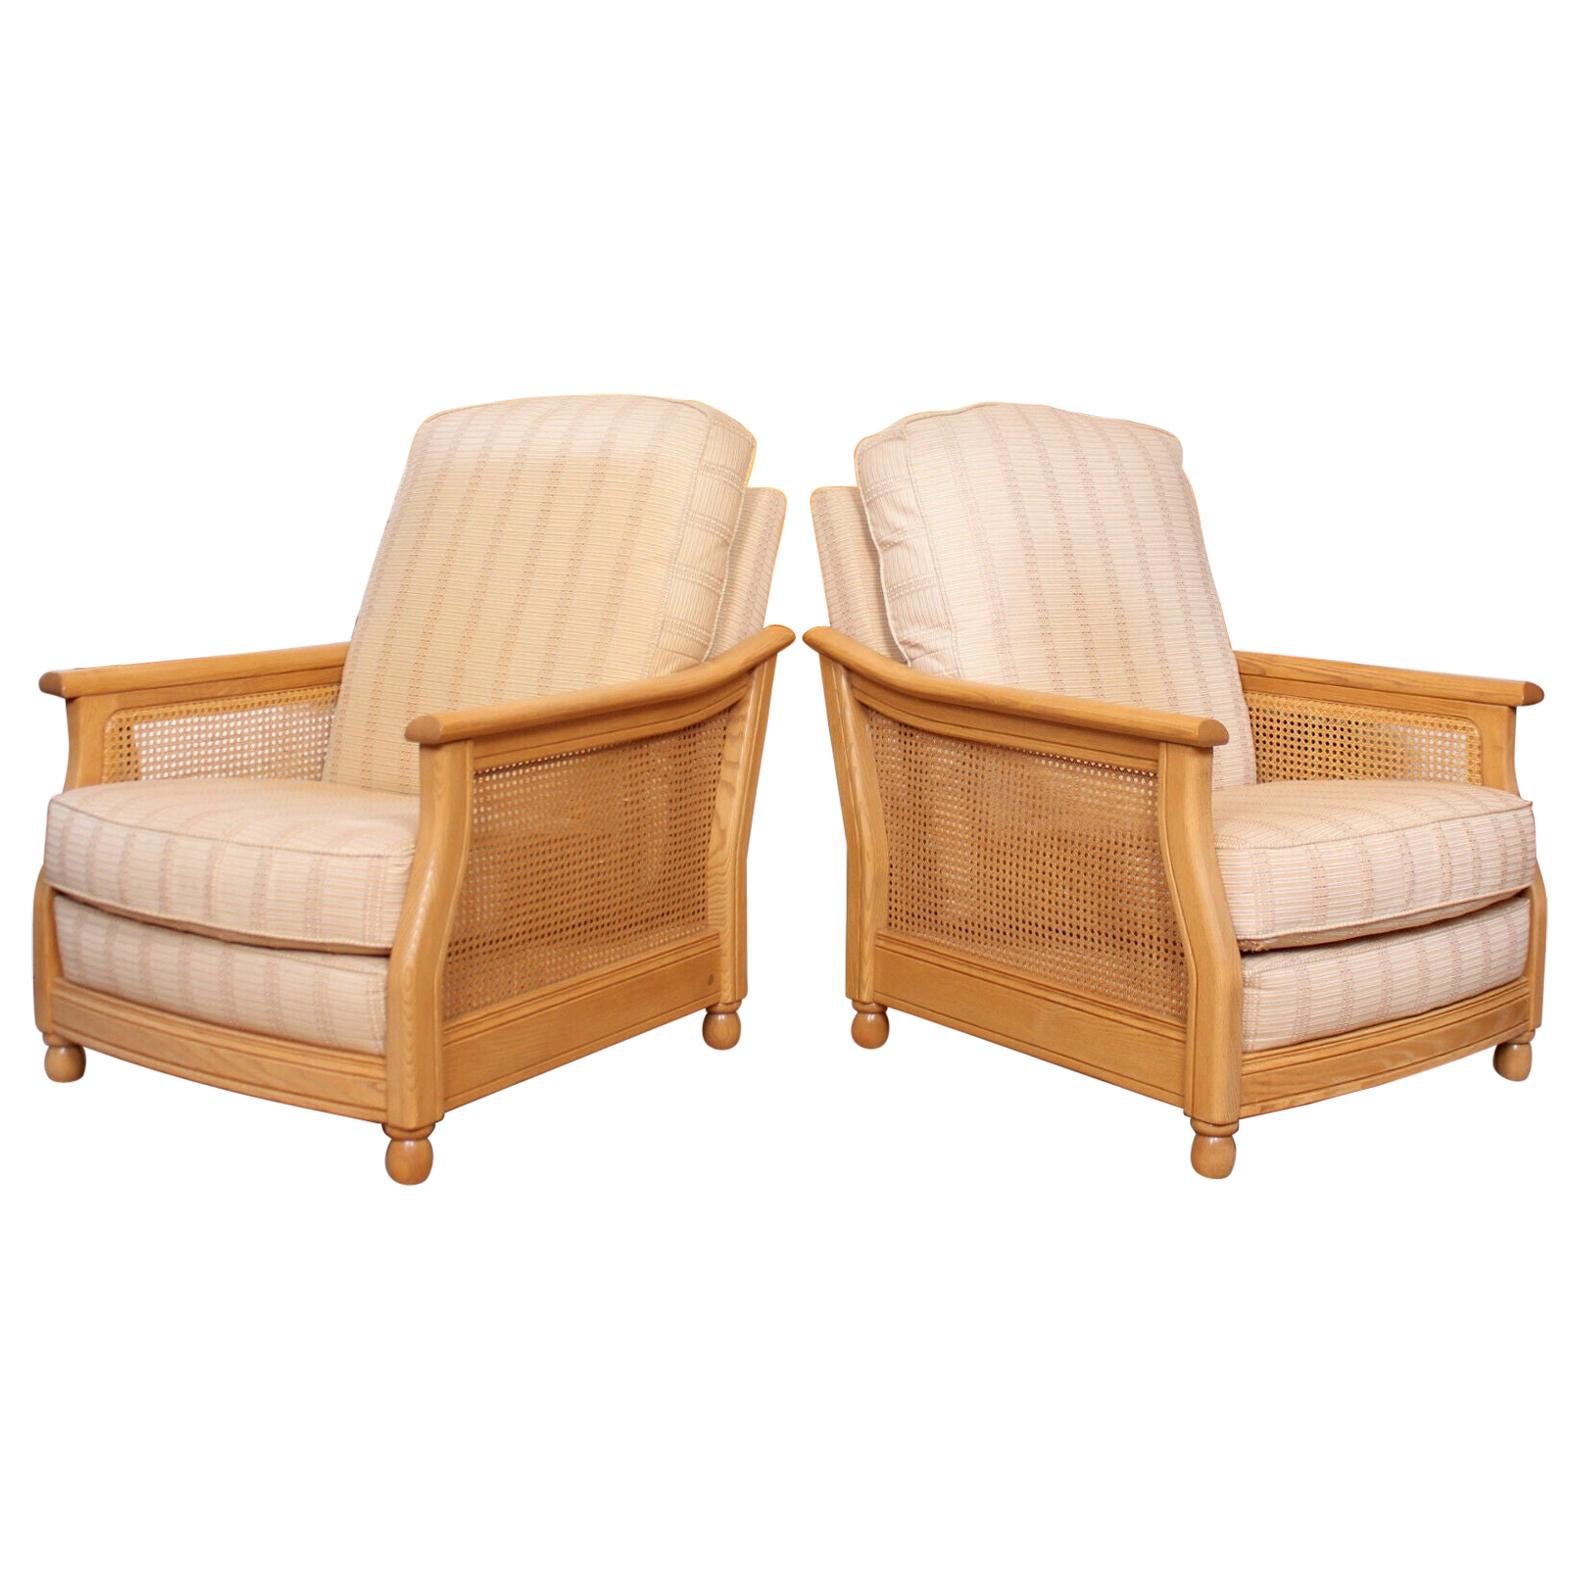 Pair of Ercol Bergère Armchairs 2 Lounge Chairs For Sale